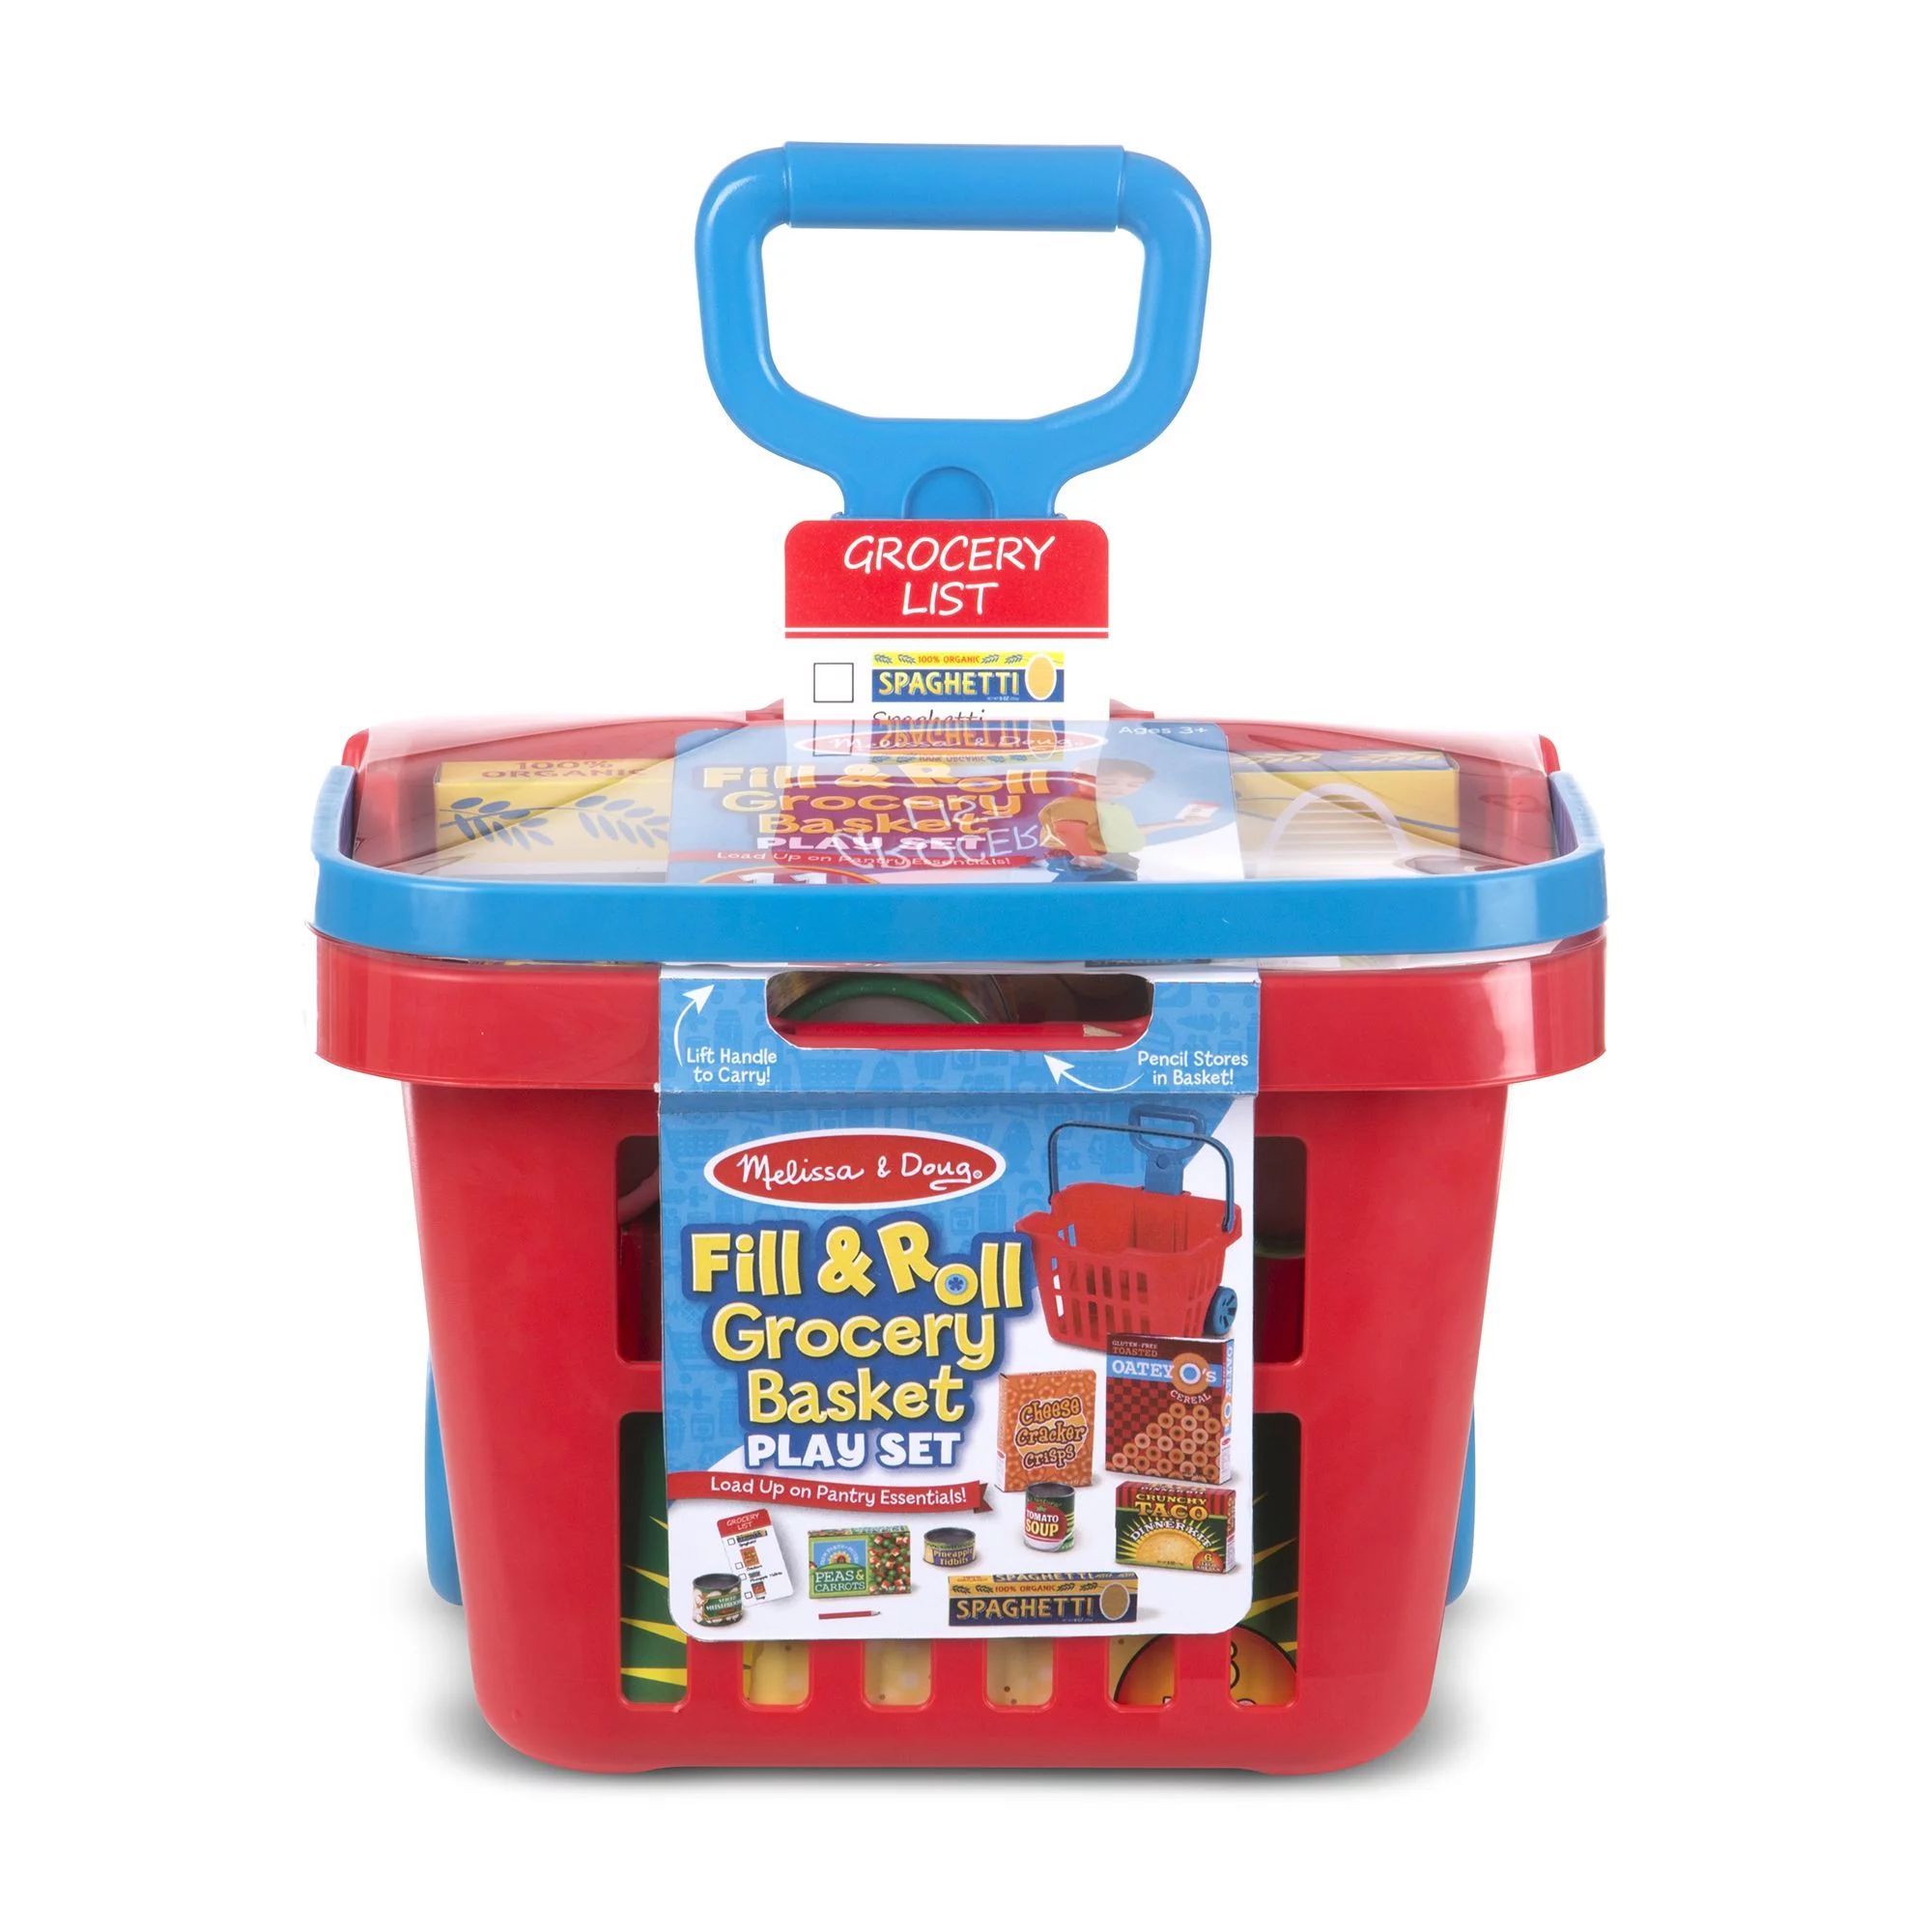 Melissa & Doug Fill and Roll Grocery Basket Play Set With Play Food Boxes and Cans (11 pcs) - Wal... | Walmart (US)